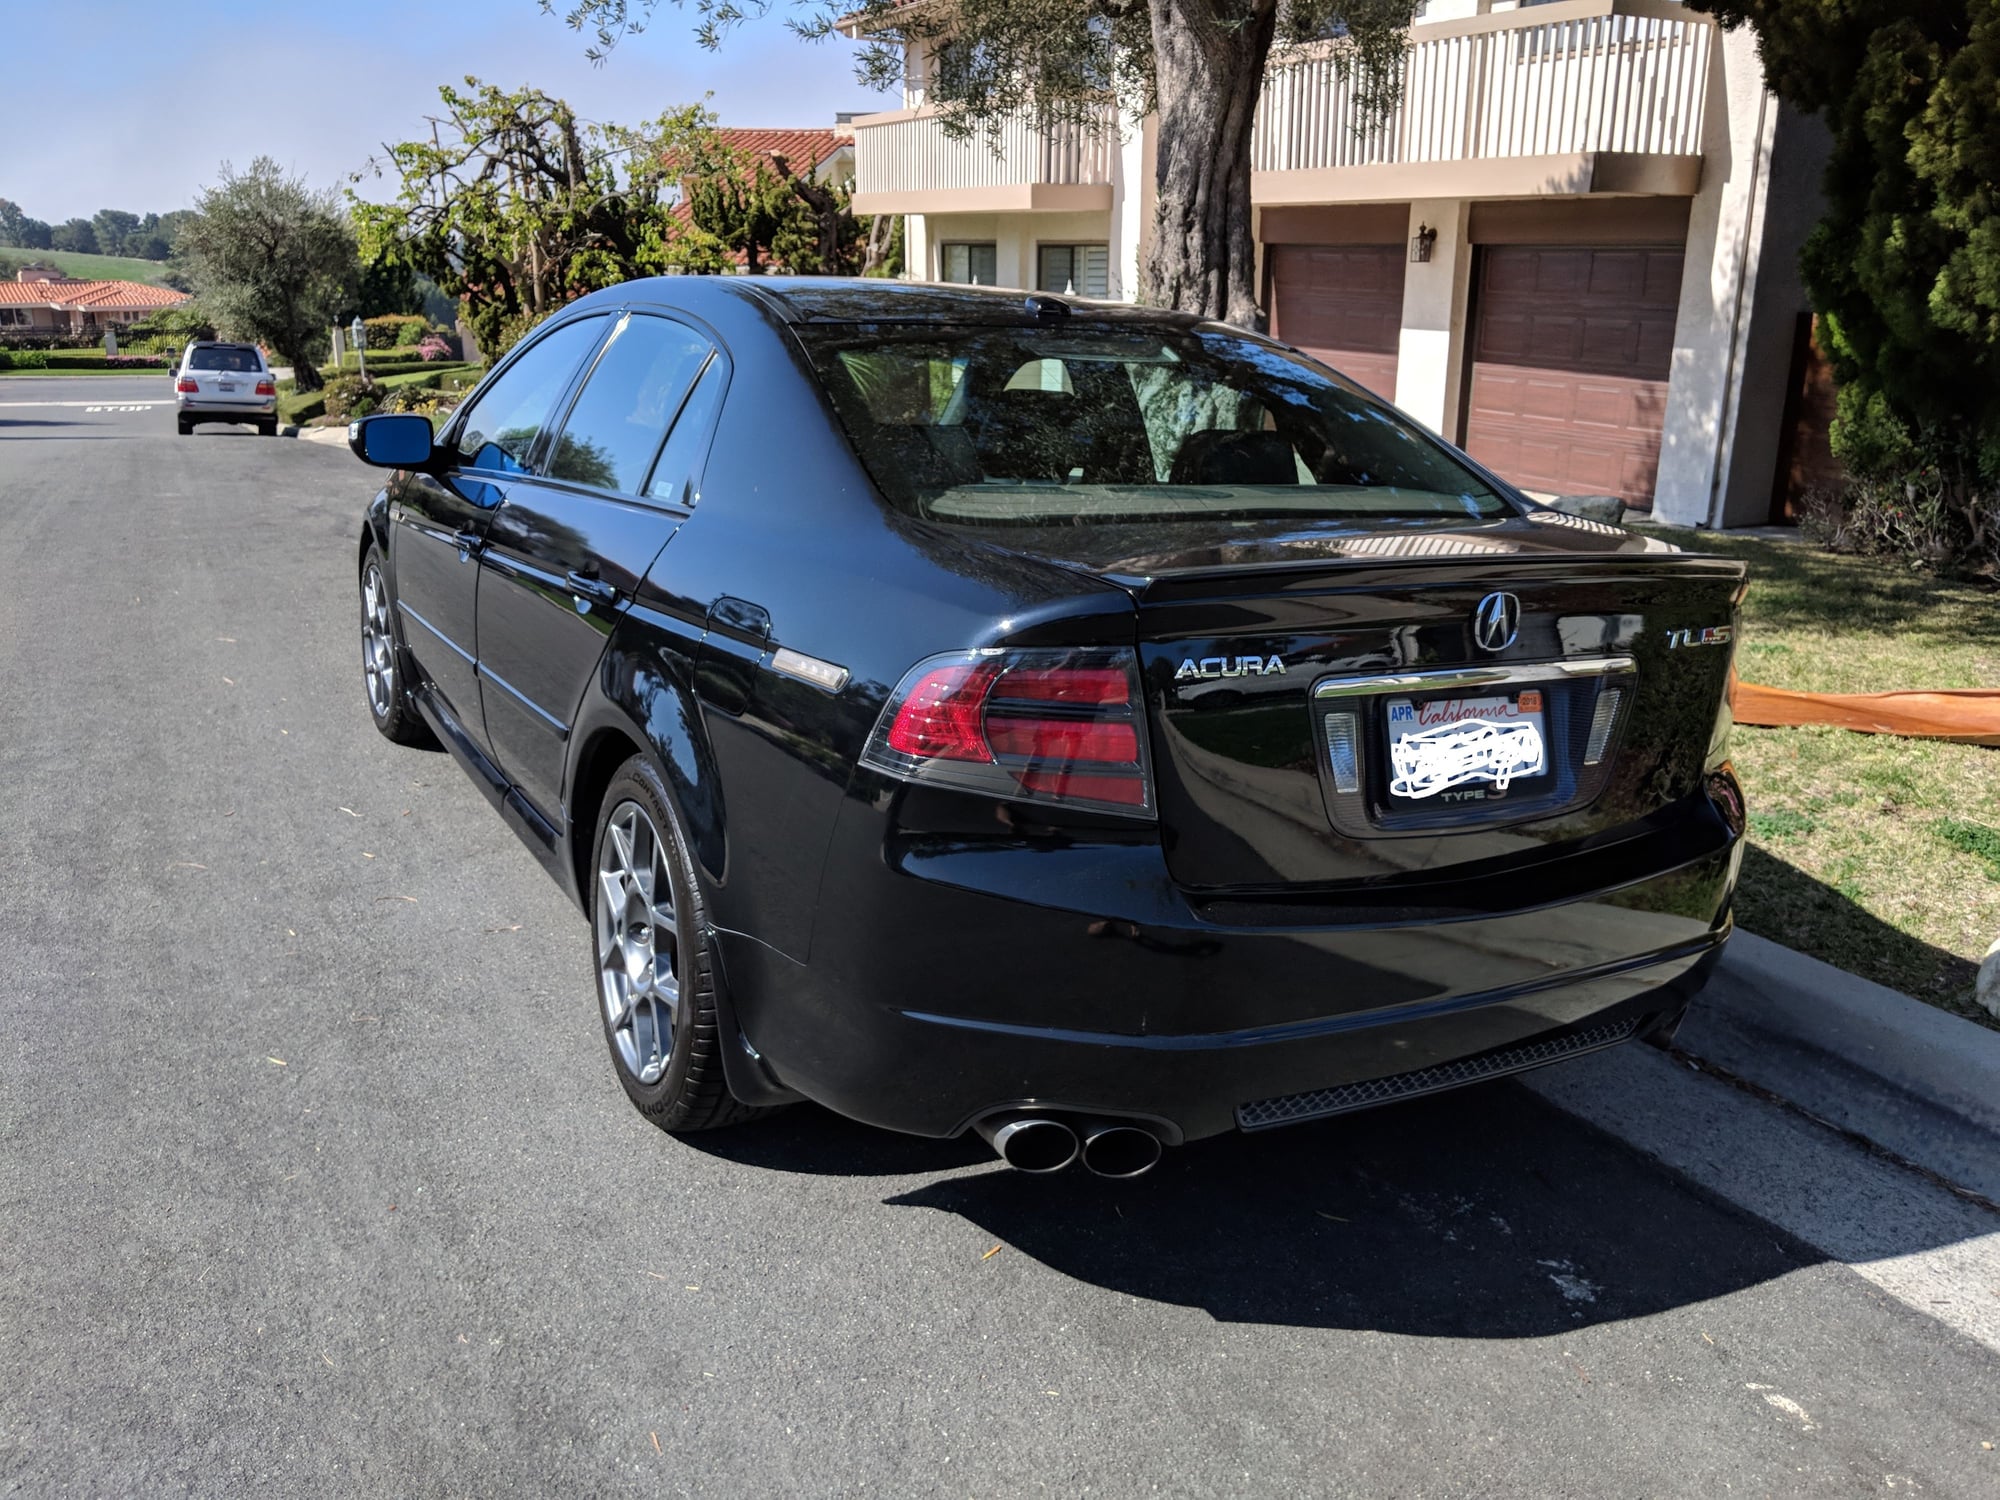 2007 Acura TL - FS: 2007 Acura TL Type S | NBP | 124.5K miles| Palos Verdes/South Bay - $11000 obo - Used - VIN 19UUA75527A021935 - 124,500 Miles - 6 cyl - 2WD - Manual - Sedan - Black - Palos Verdes/south Bay, CA 90274, United States